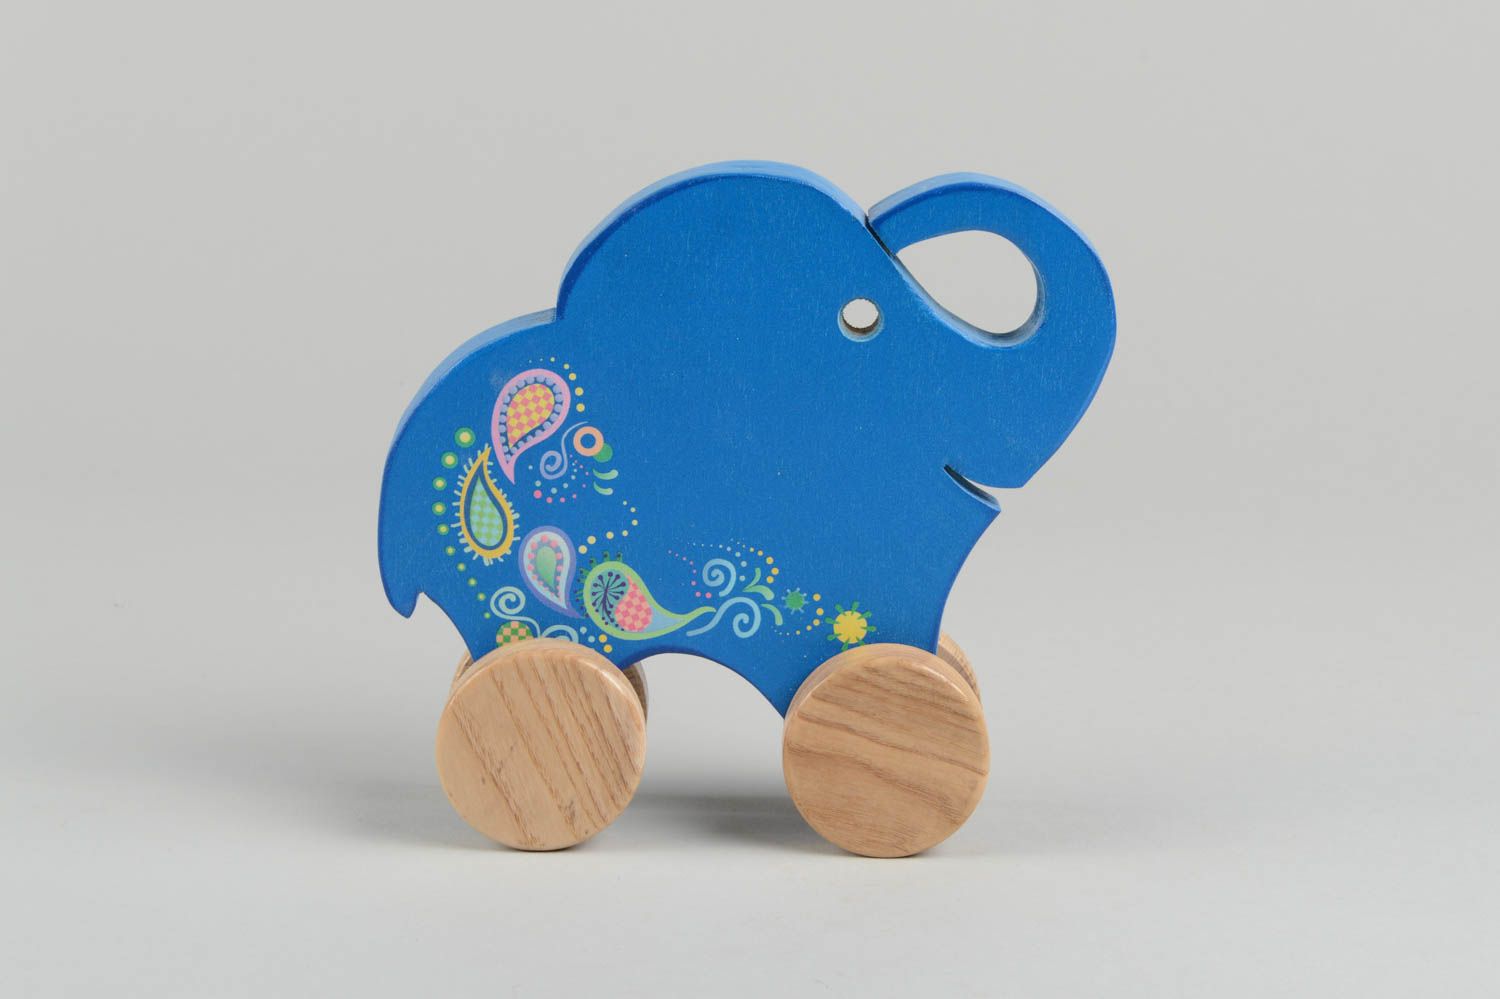 Handmade blue wooden toy unusual bright rolling toy stylish gift for kids photo 2